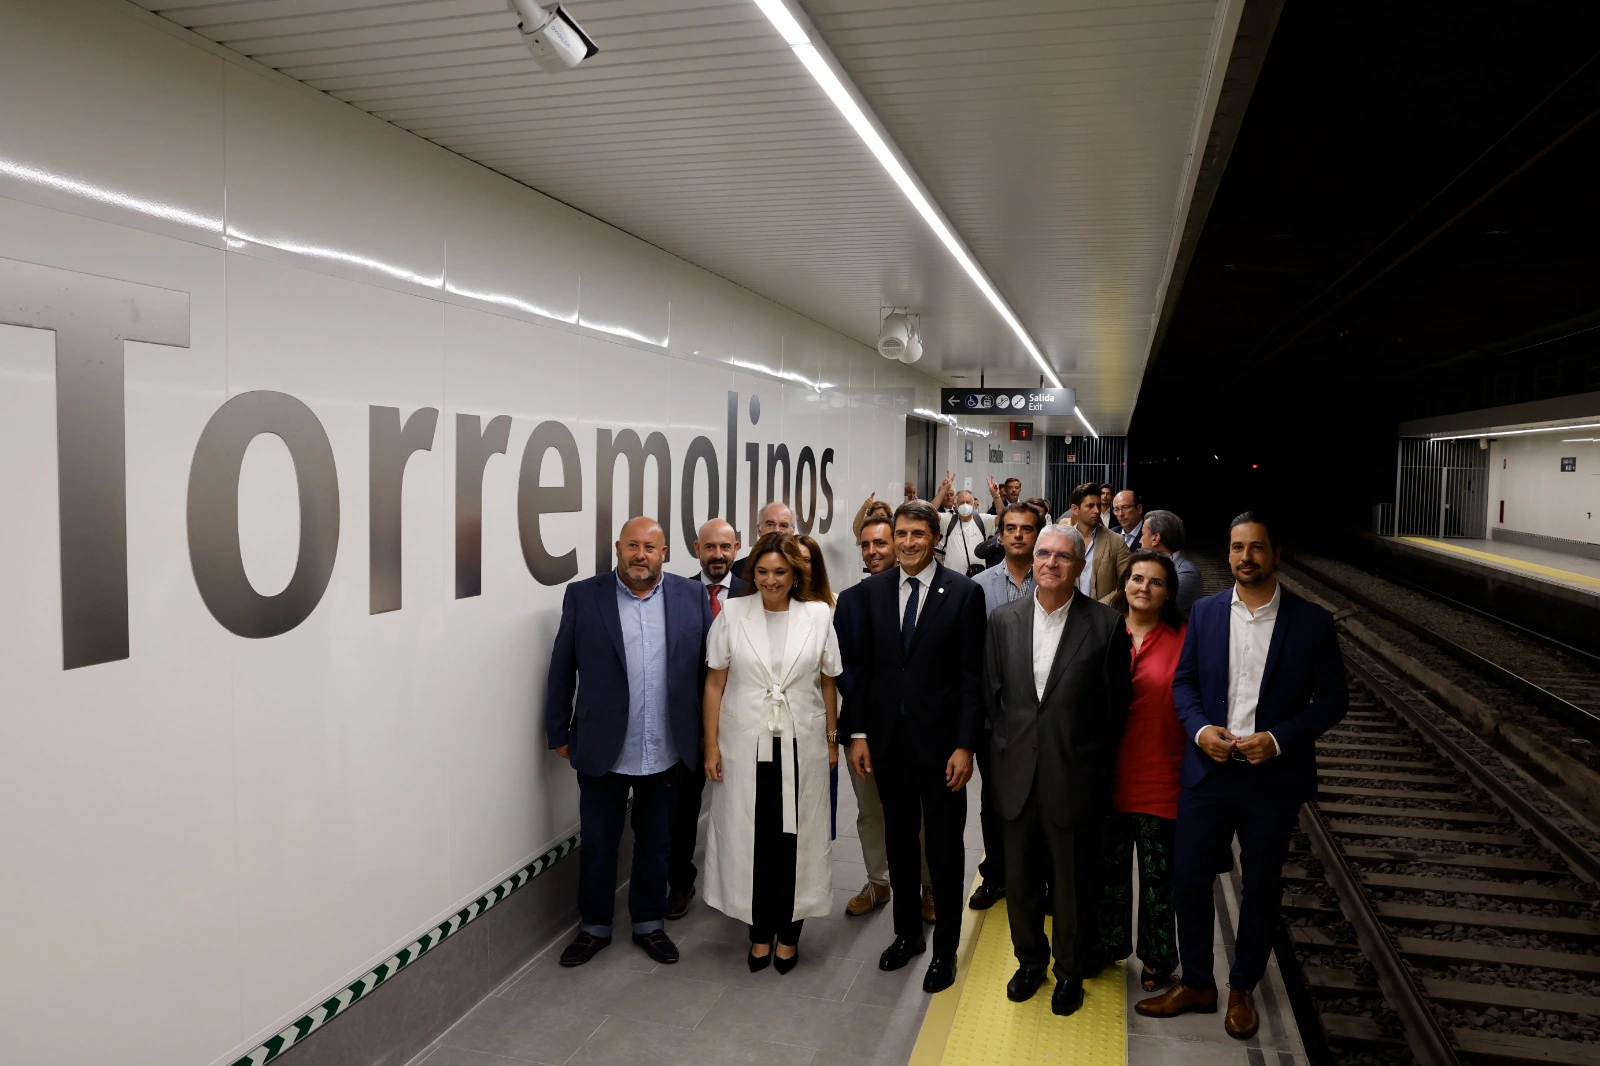 Officials at the opening of the new Cercanías station in the centre of Torremolinos. 